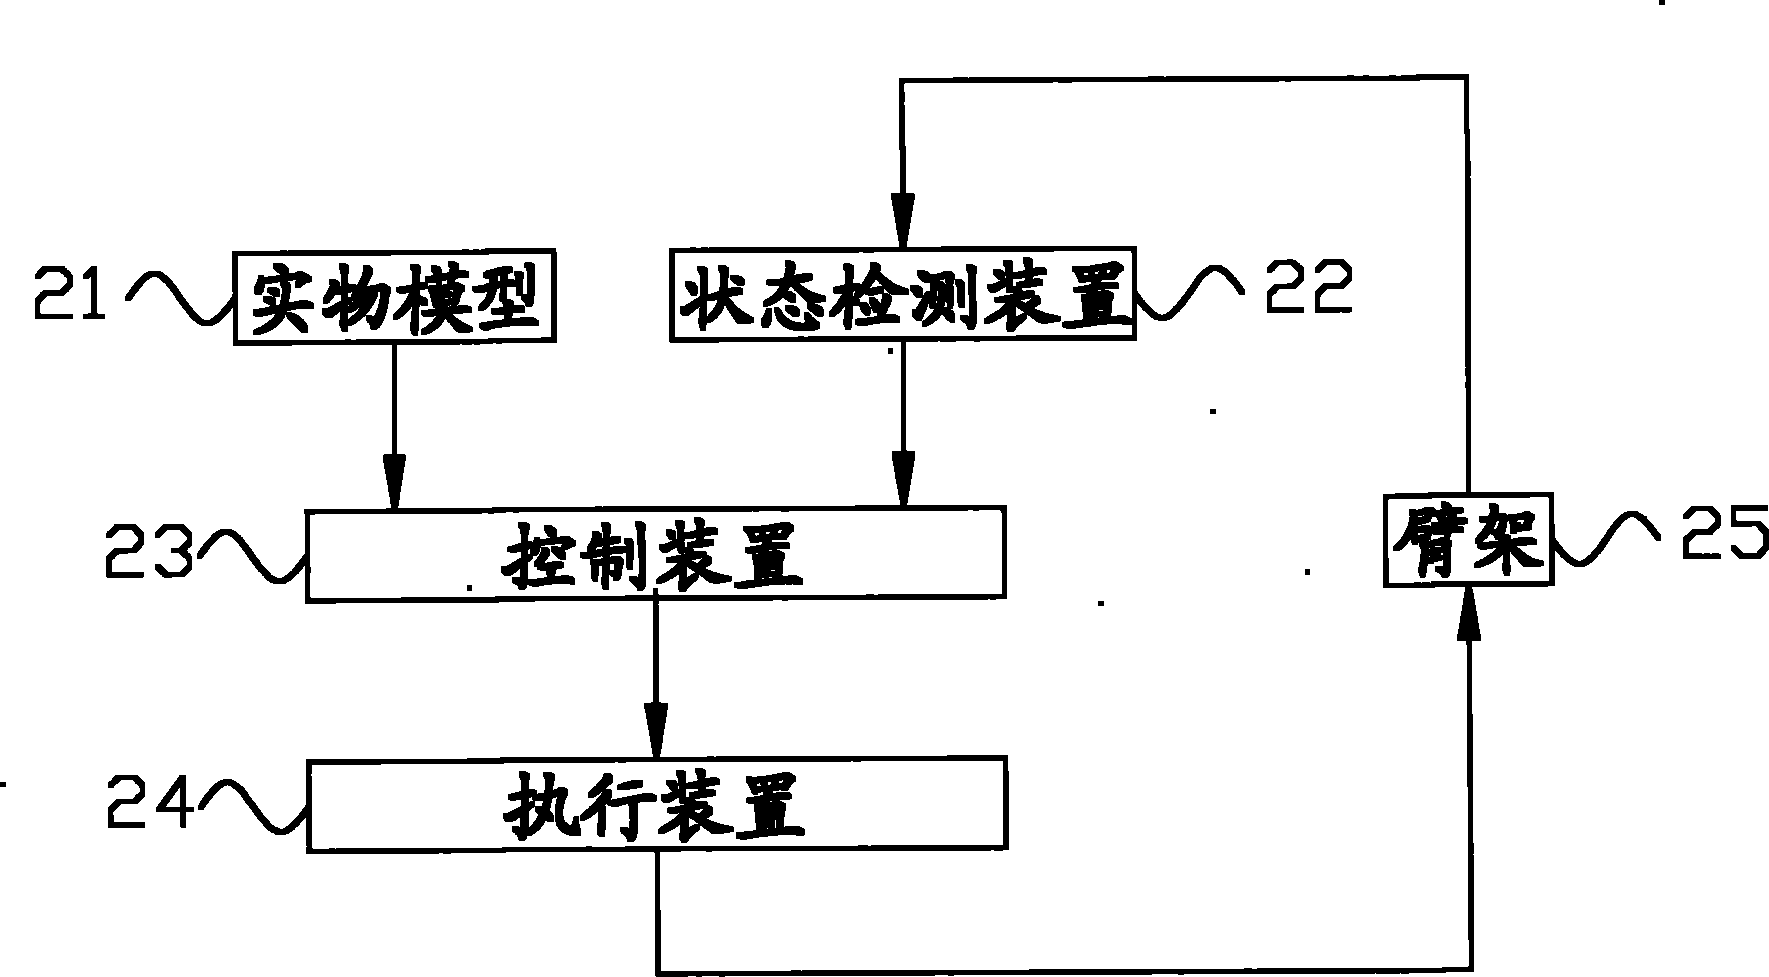 Engineering plant and arm support control system thereof